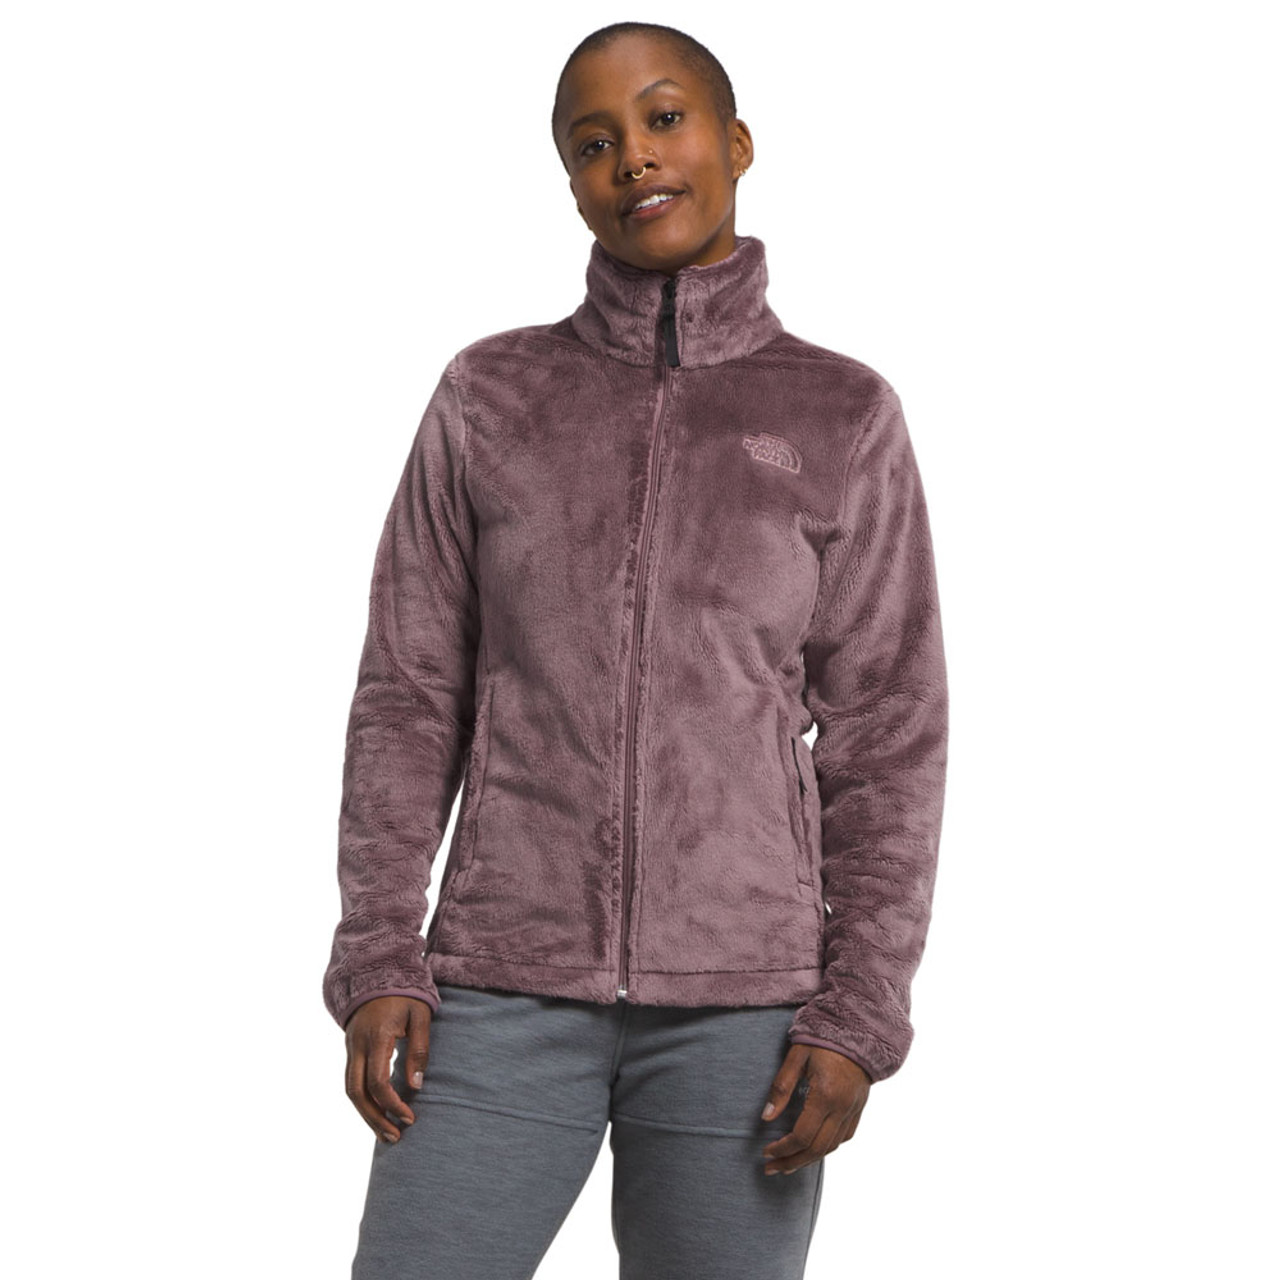 The North Face Women's Osito Jacket - Alabama Outdoors